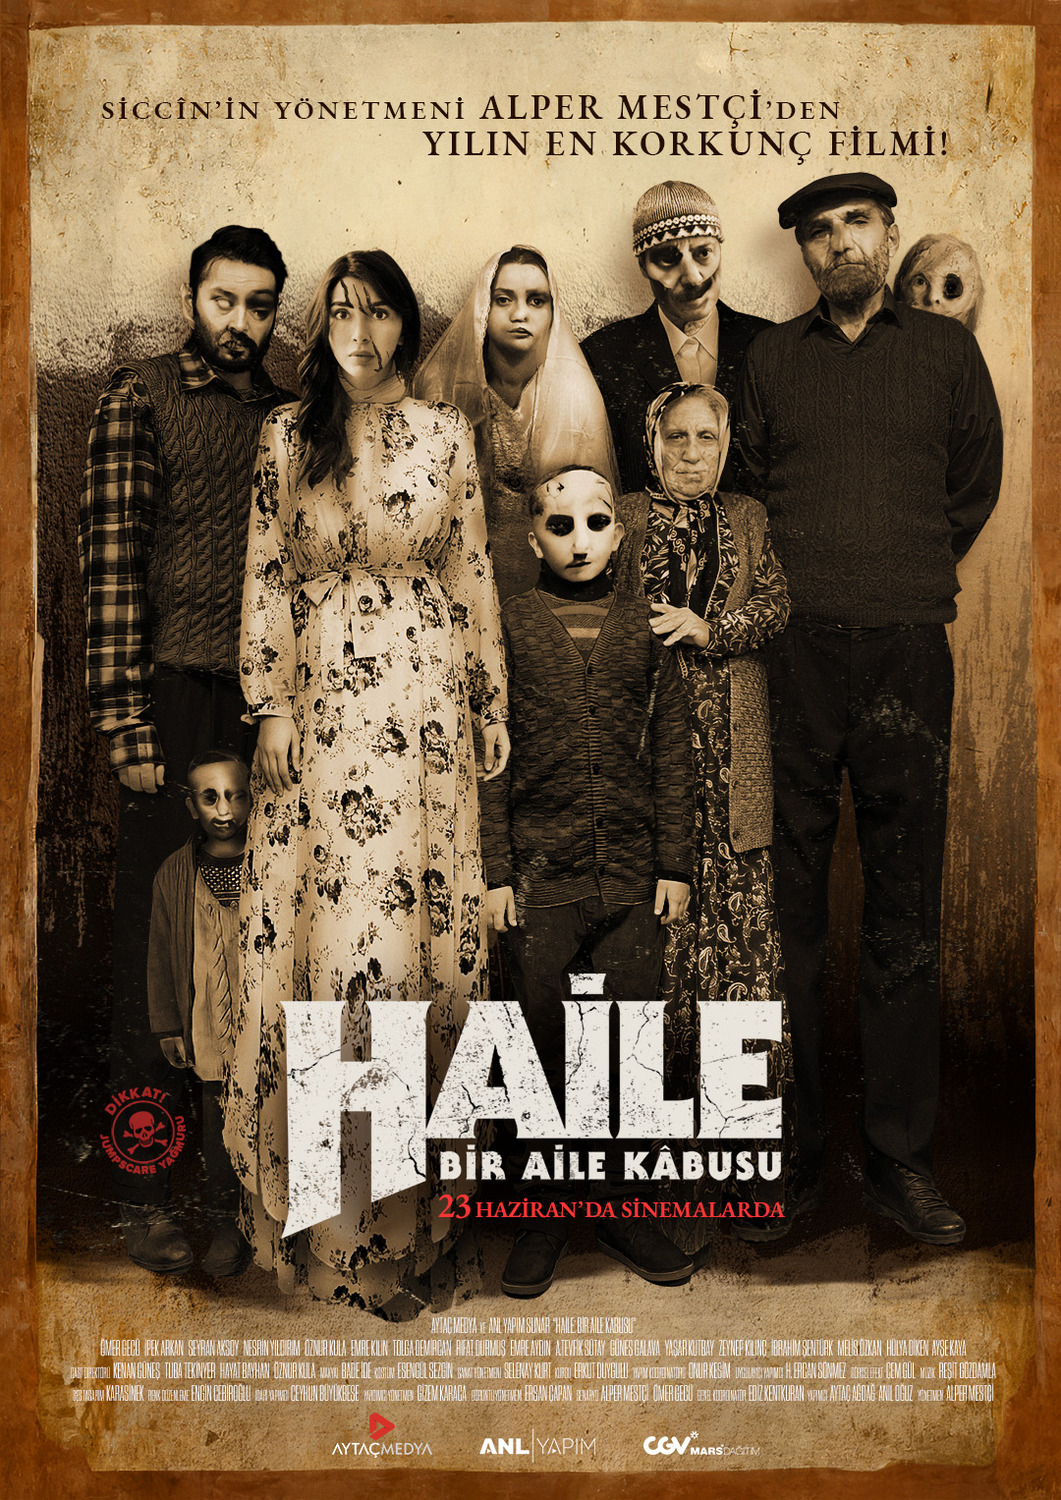 Extra Large Movie Poster Image for Haile: Bir Aile Kâbusu (#2 of 2)